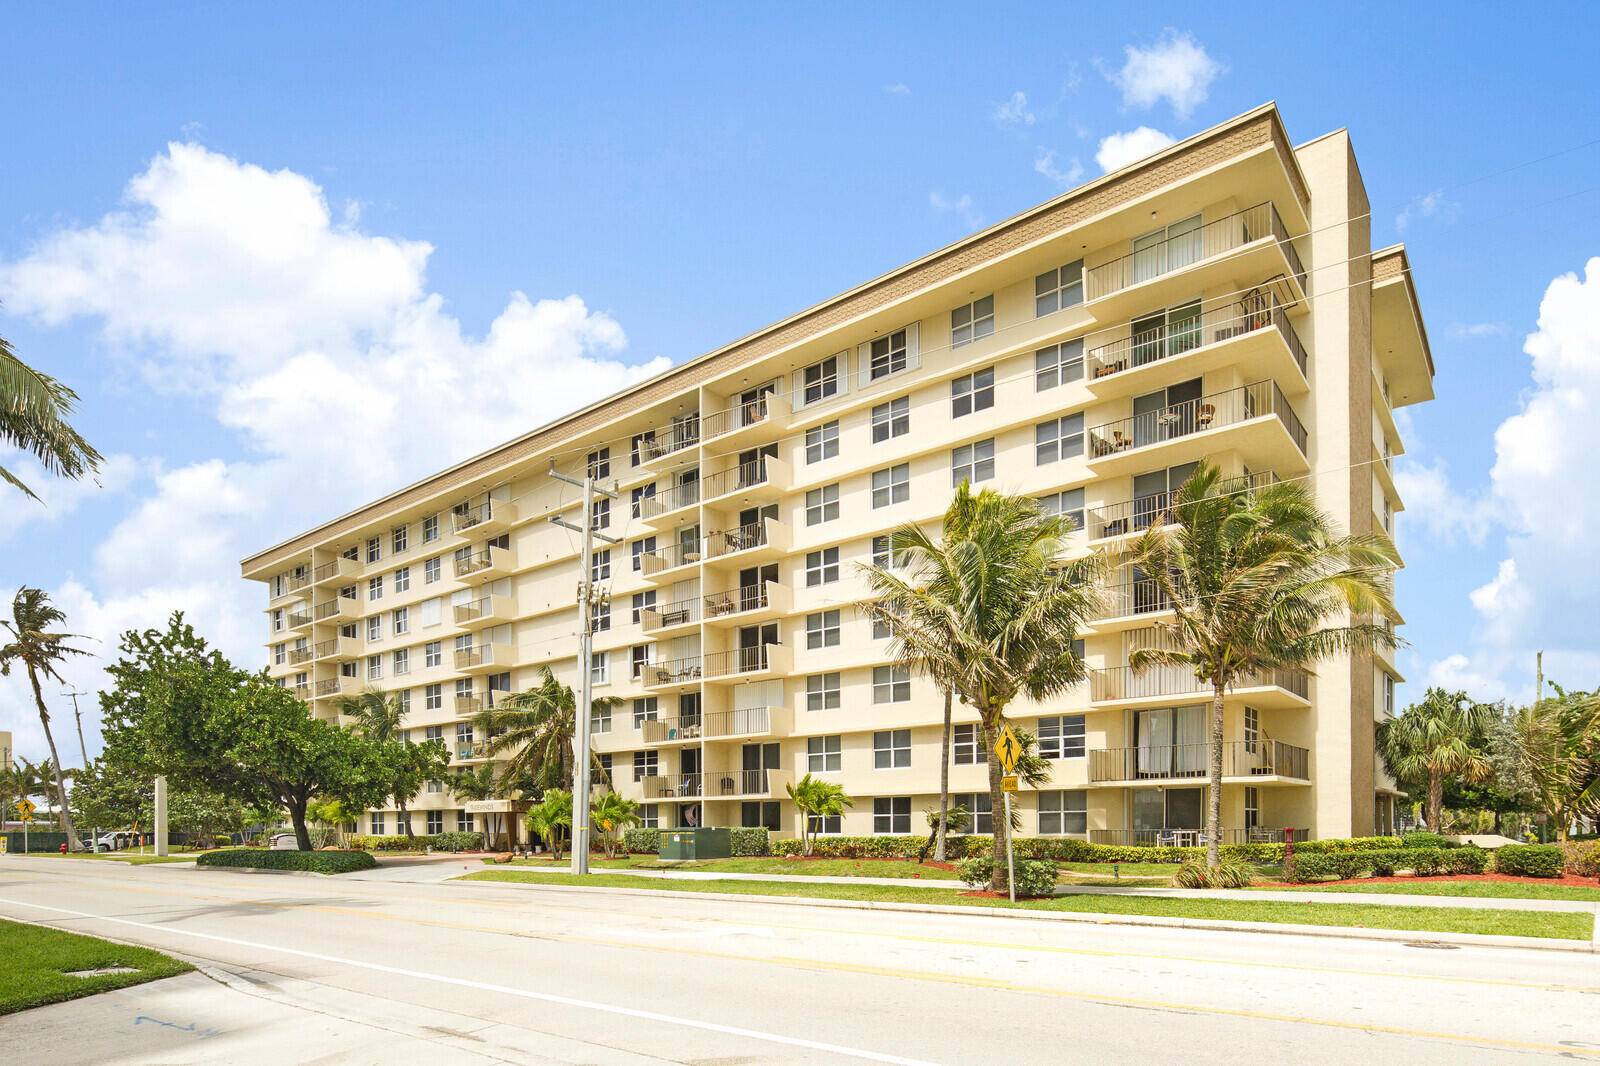 This is the perfect Winter Retreat or Year Round Beach Condo !